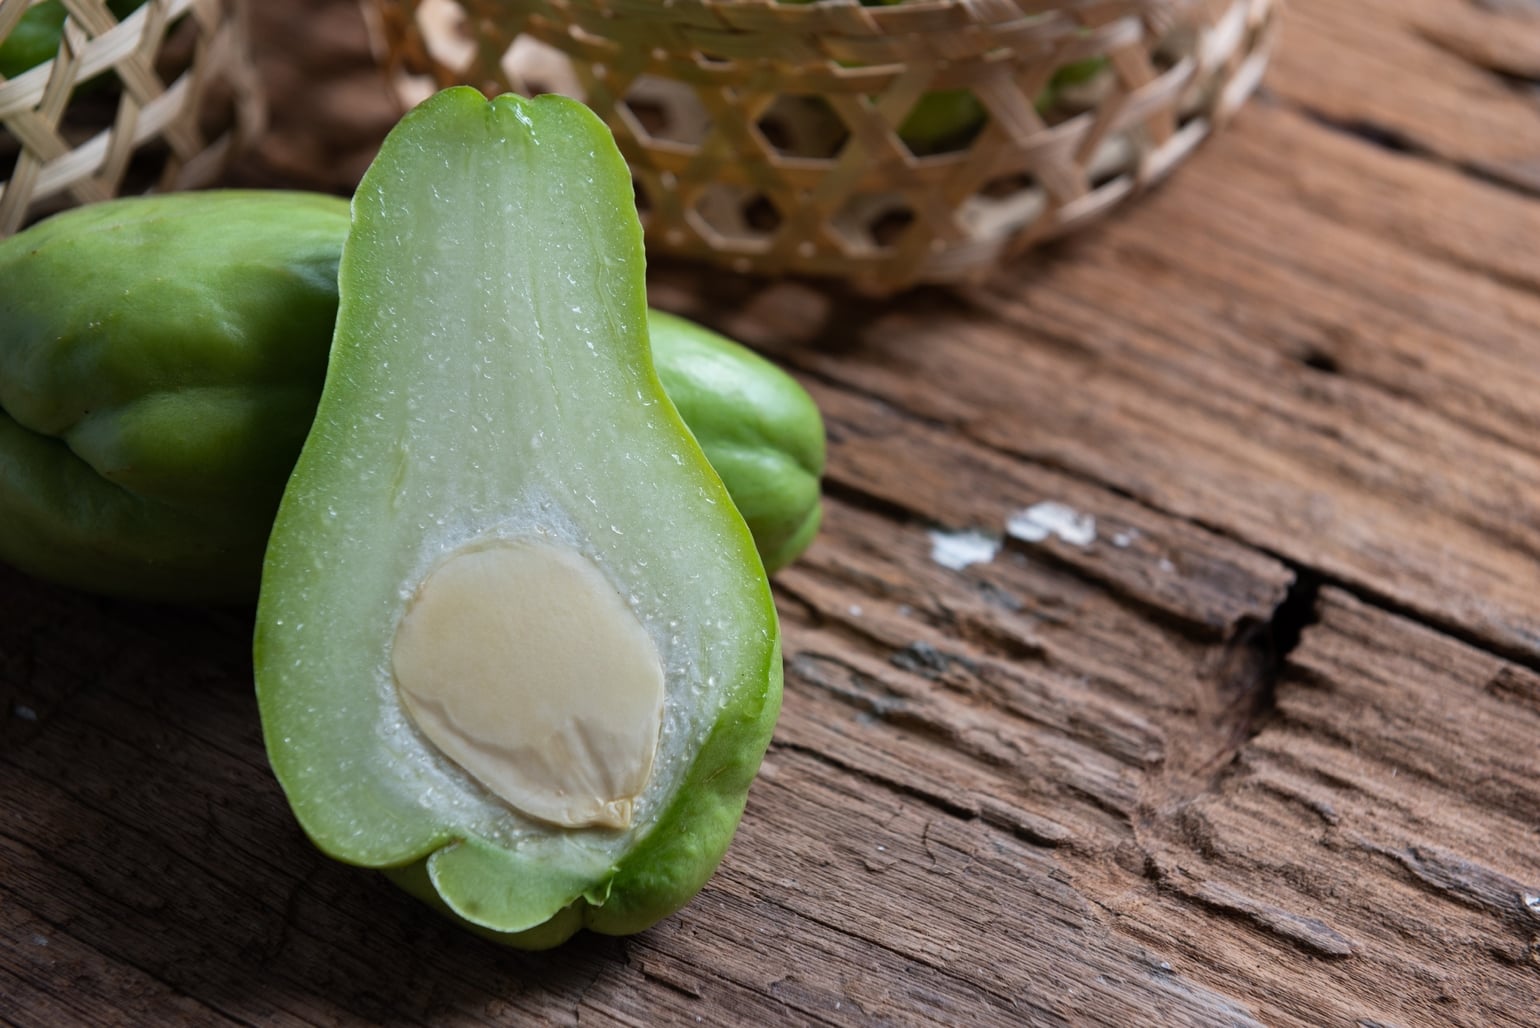 Chayote: highly nutritious and low in calories